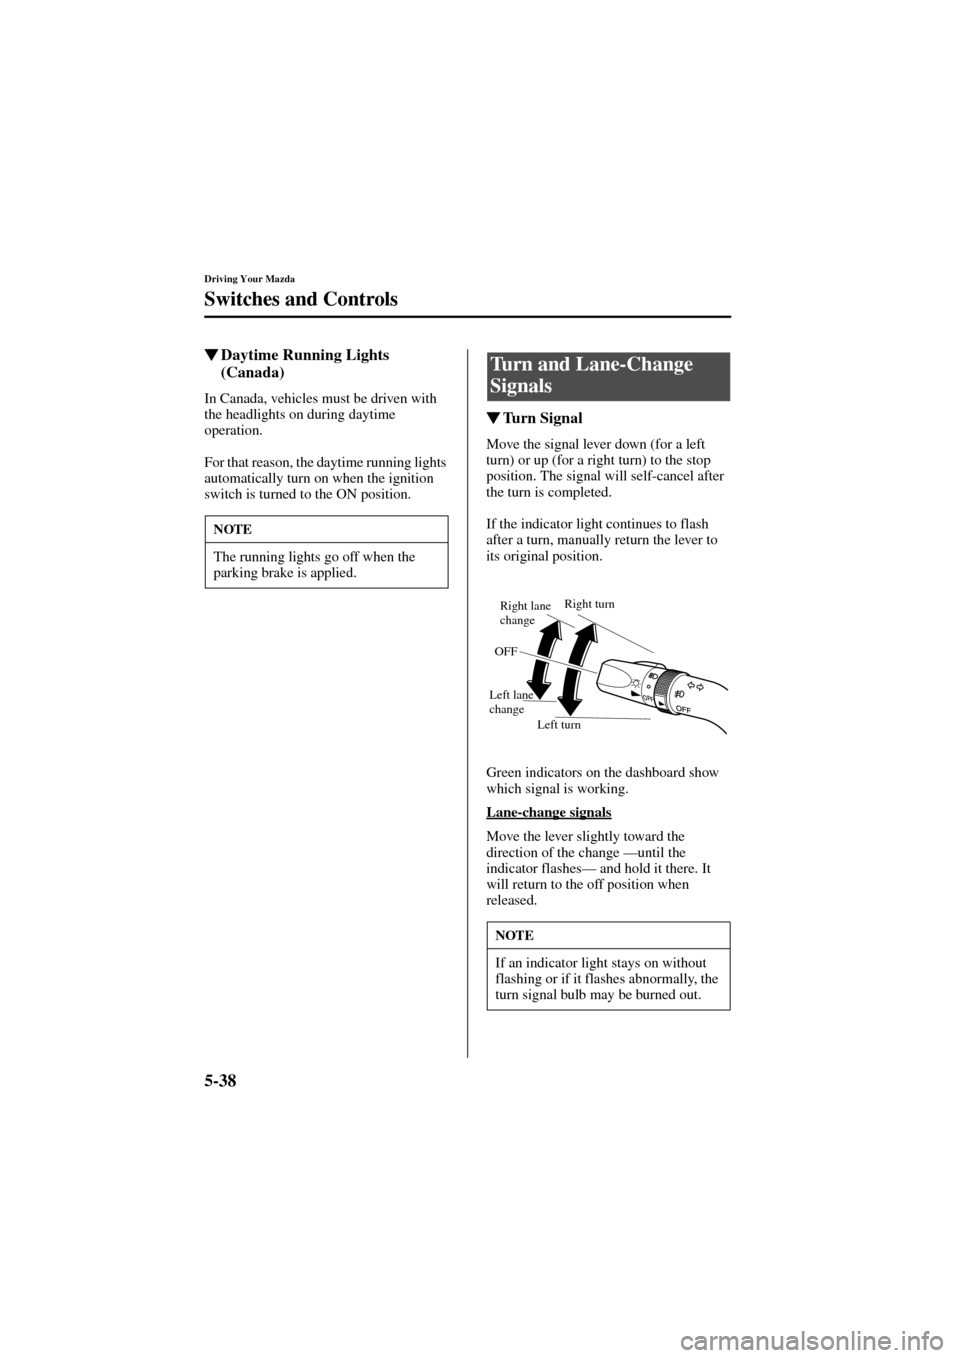 MAZDA MODEL 6 2004  Owners Manual (in English) 5-38
Driving Your Mazda
Switches and Controls
Form No. 8R29-EA-02I
Daytime Running Lights 
(Canada)
In Canada, vehicles must be driven with 
the headlights on during daytime 
operation.
For that reas